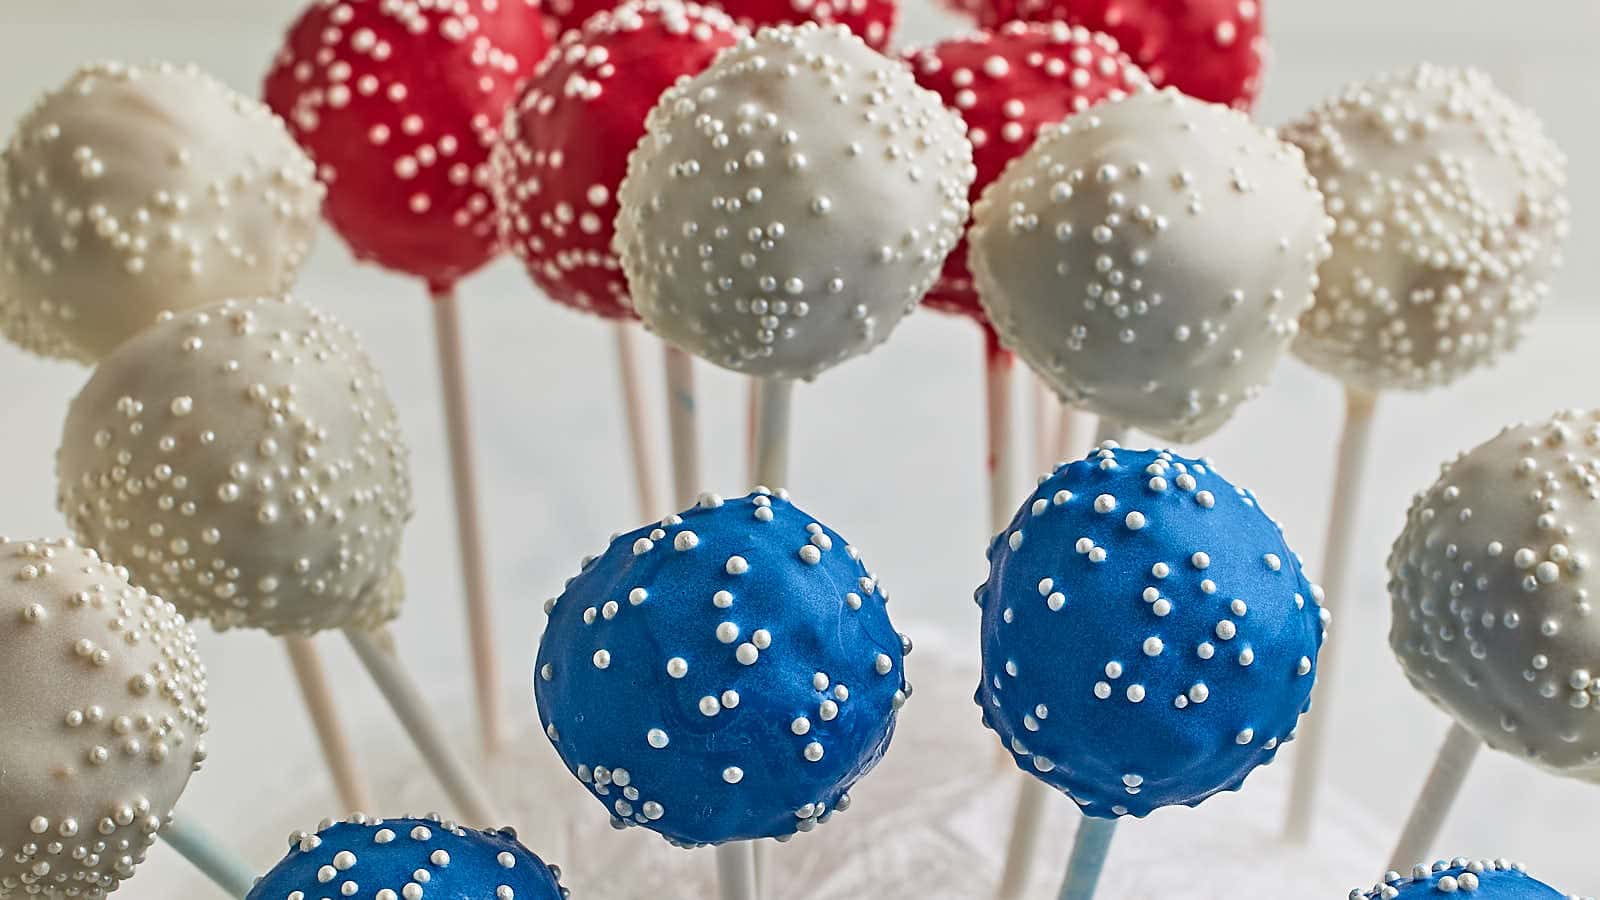 A variety of cake pops.